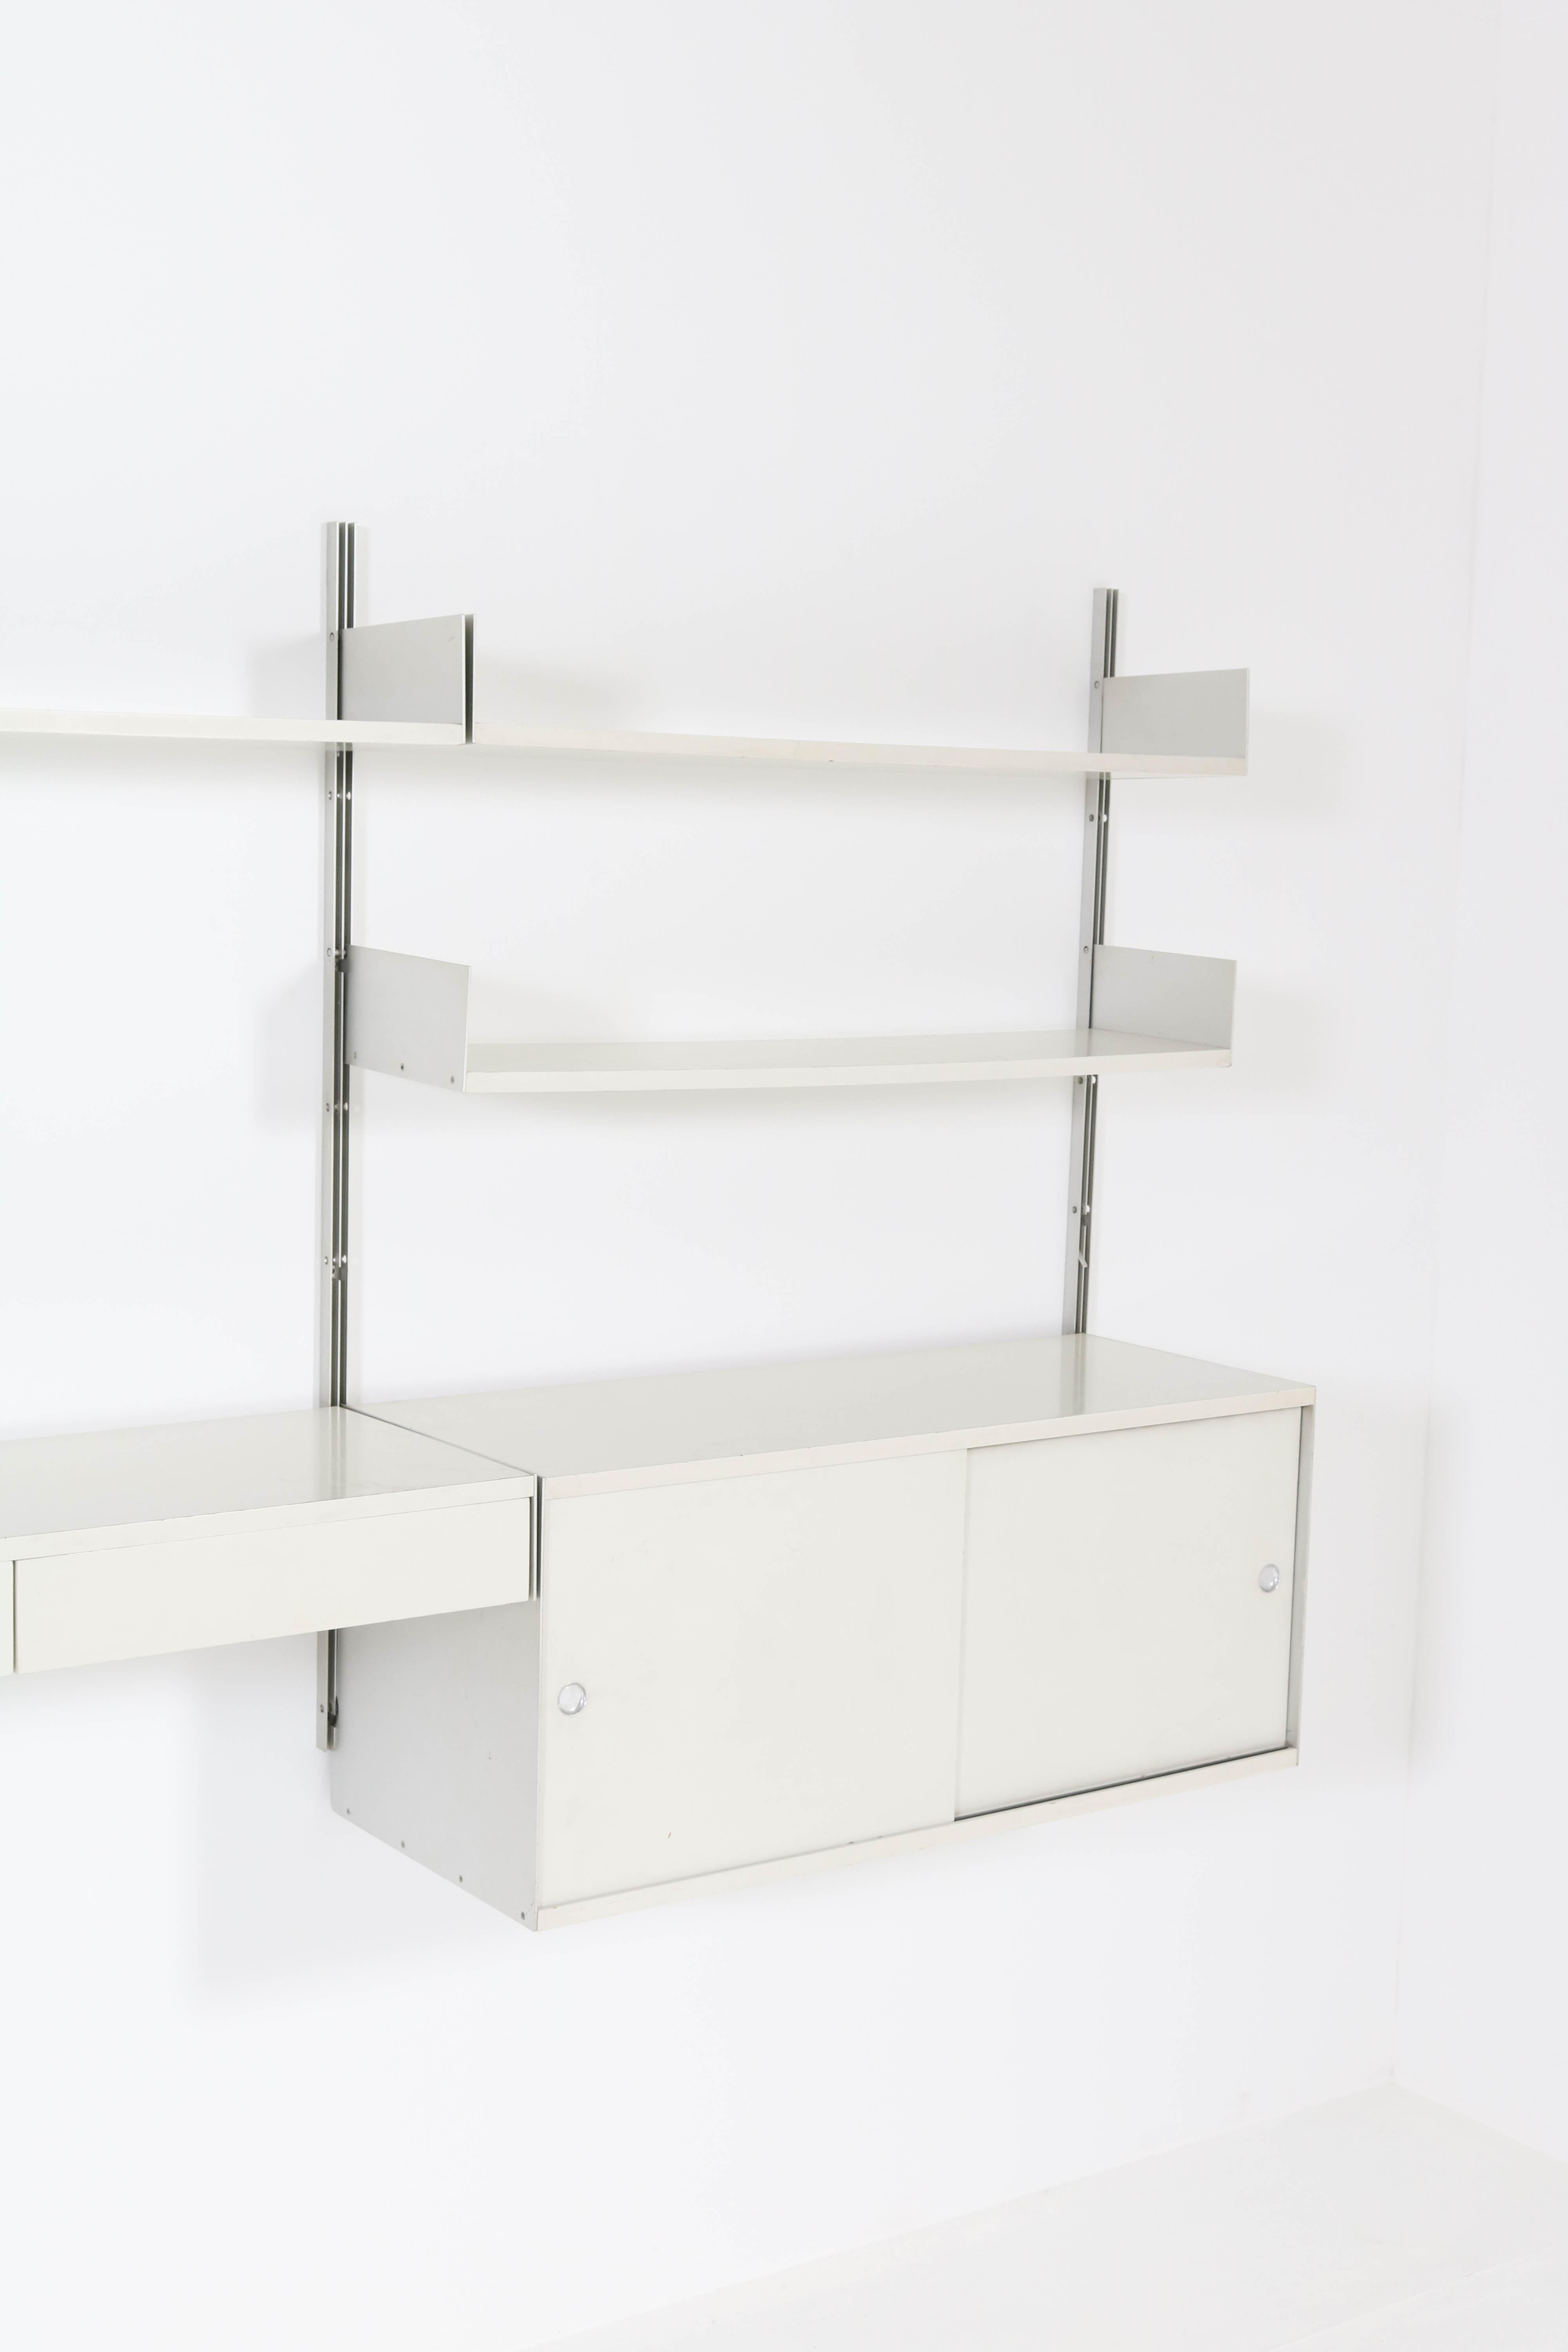 Mid-20th Century Mid-Century Modern Wall Shelving Unit Model 606 by Dieter Rams for Vitsoe, 1960s